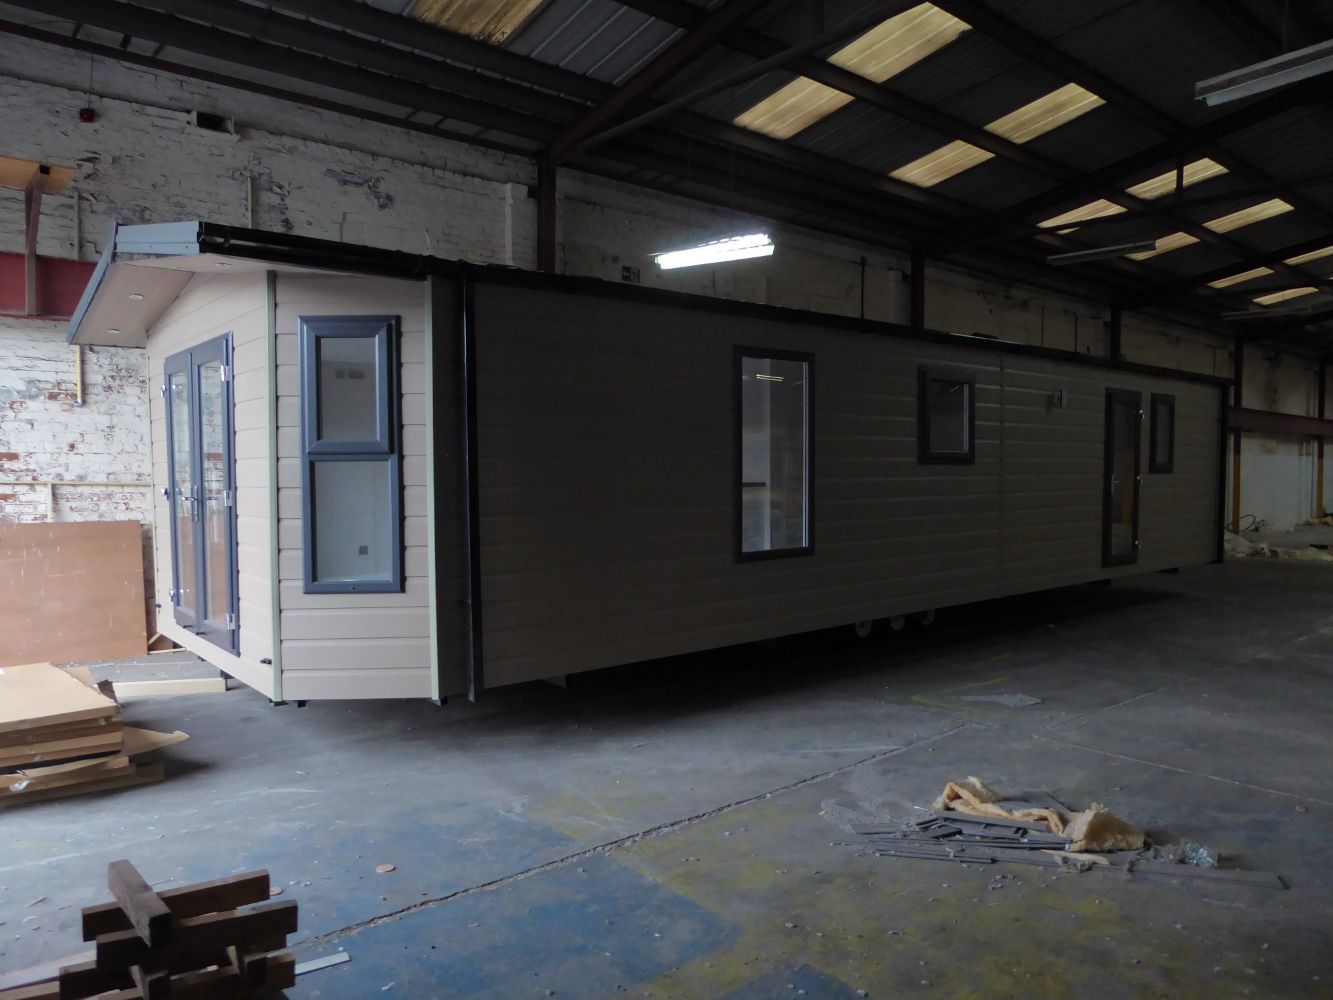 8293 - Auction of New Mobile Home, Industrial Machinery and Bulk Storage Containers